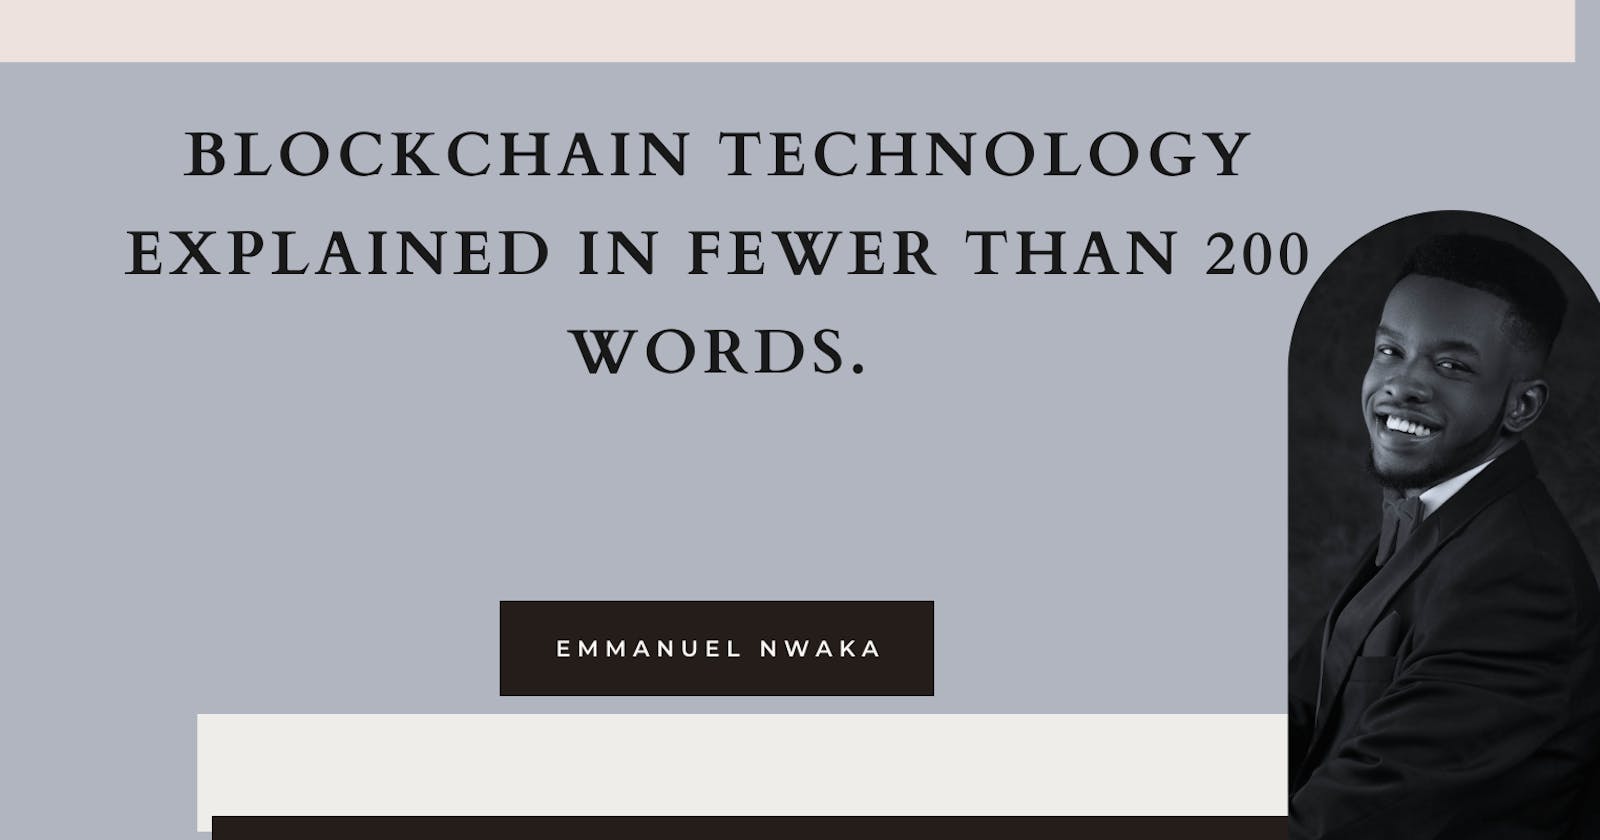 Blockchain Technology Explained in Fewer Than 200 Words